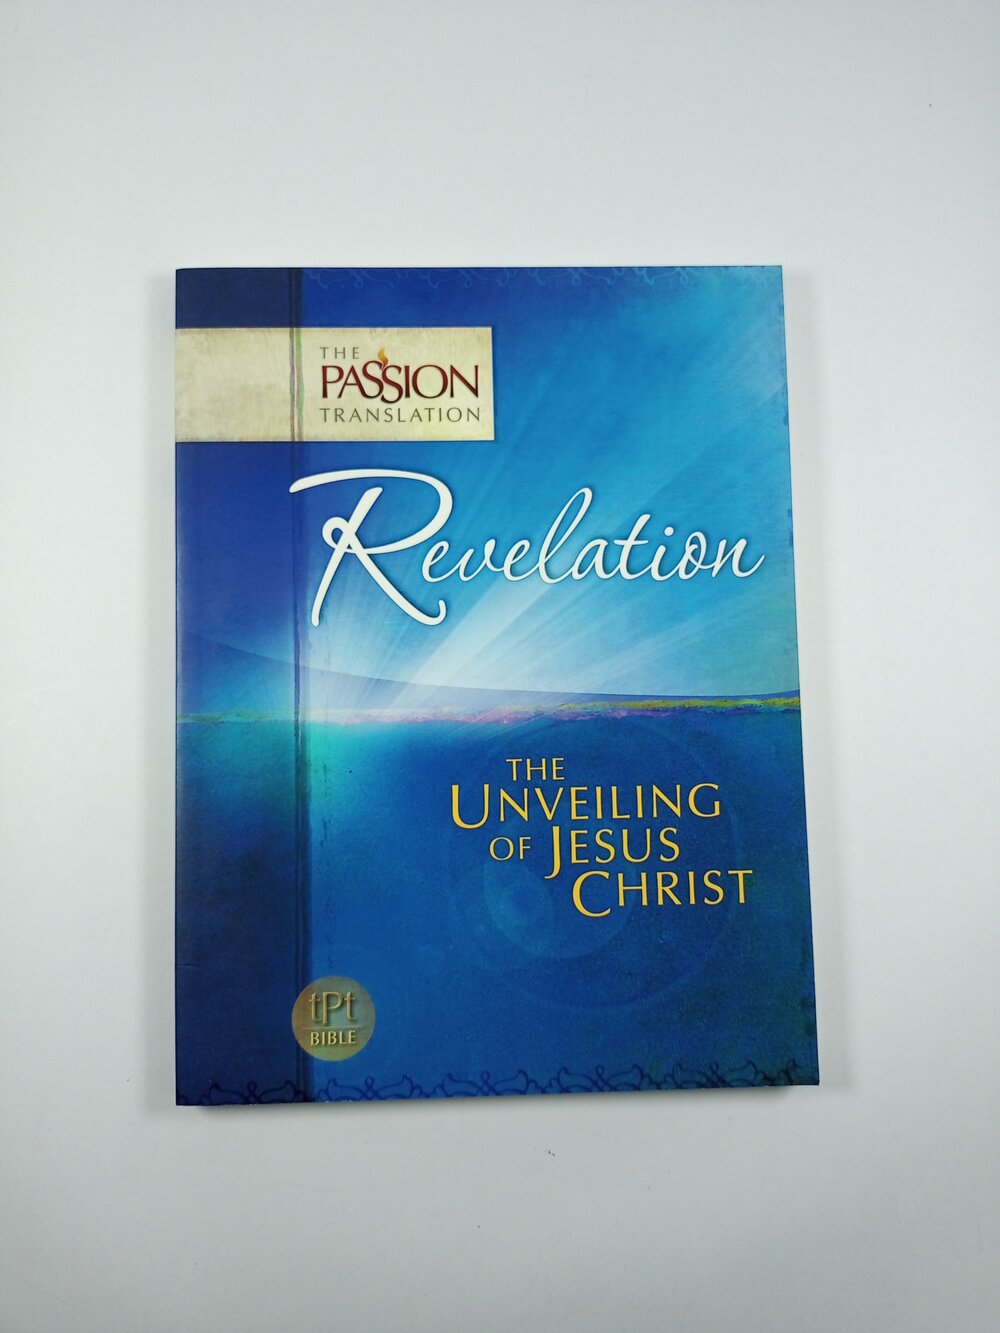 Paperback　Simmons　Translation,　Bridge　by　Brian　Jesus　Books　Unveiling　Revelation　The　Passion　The　—　of　Christ